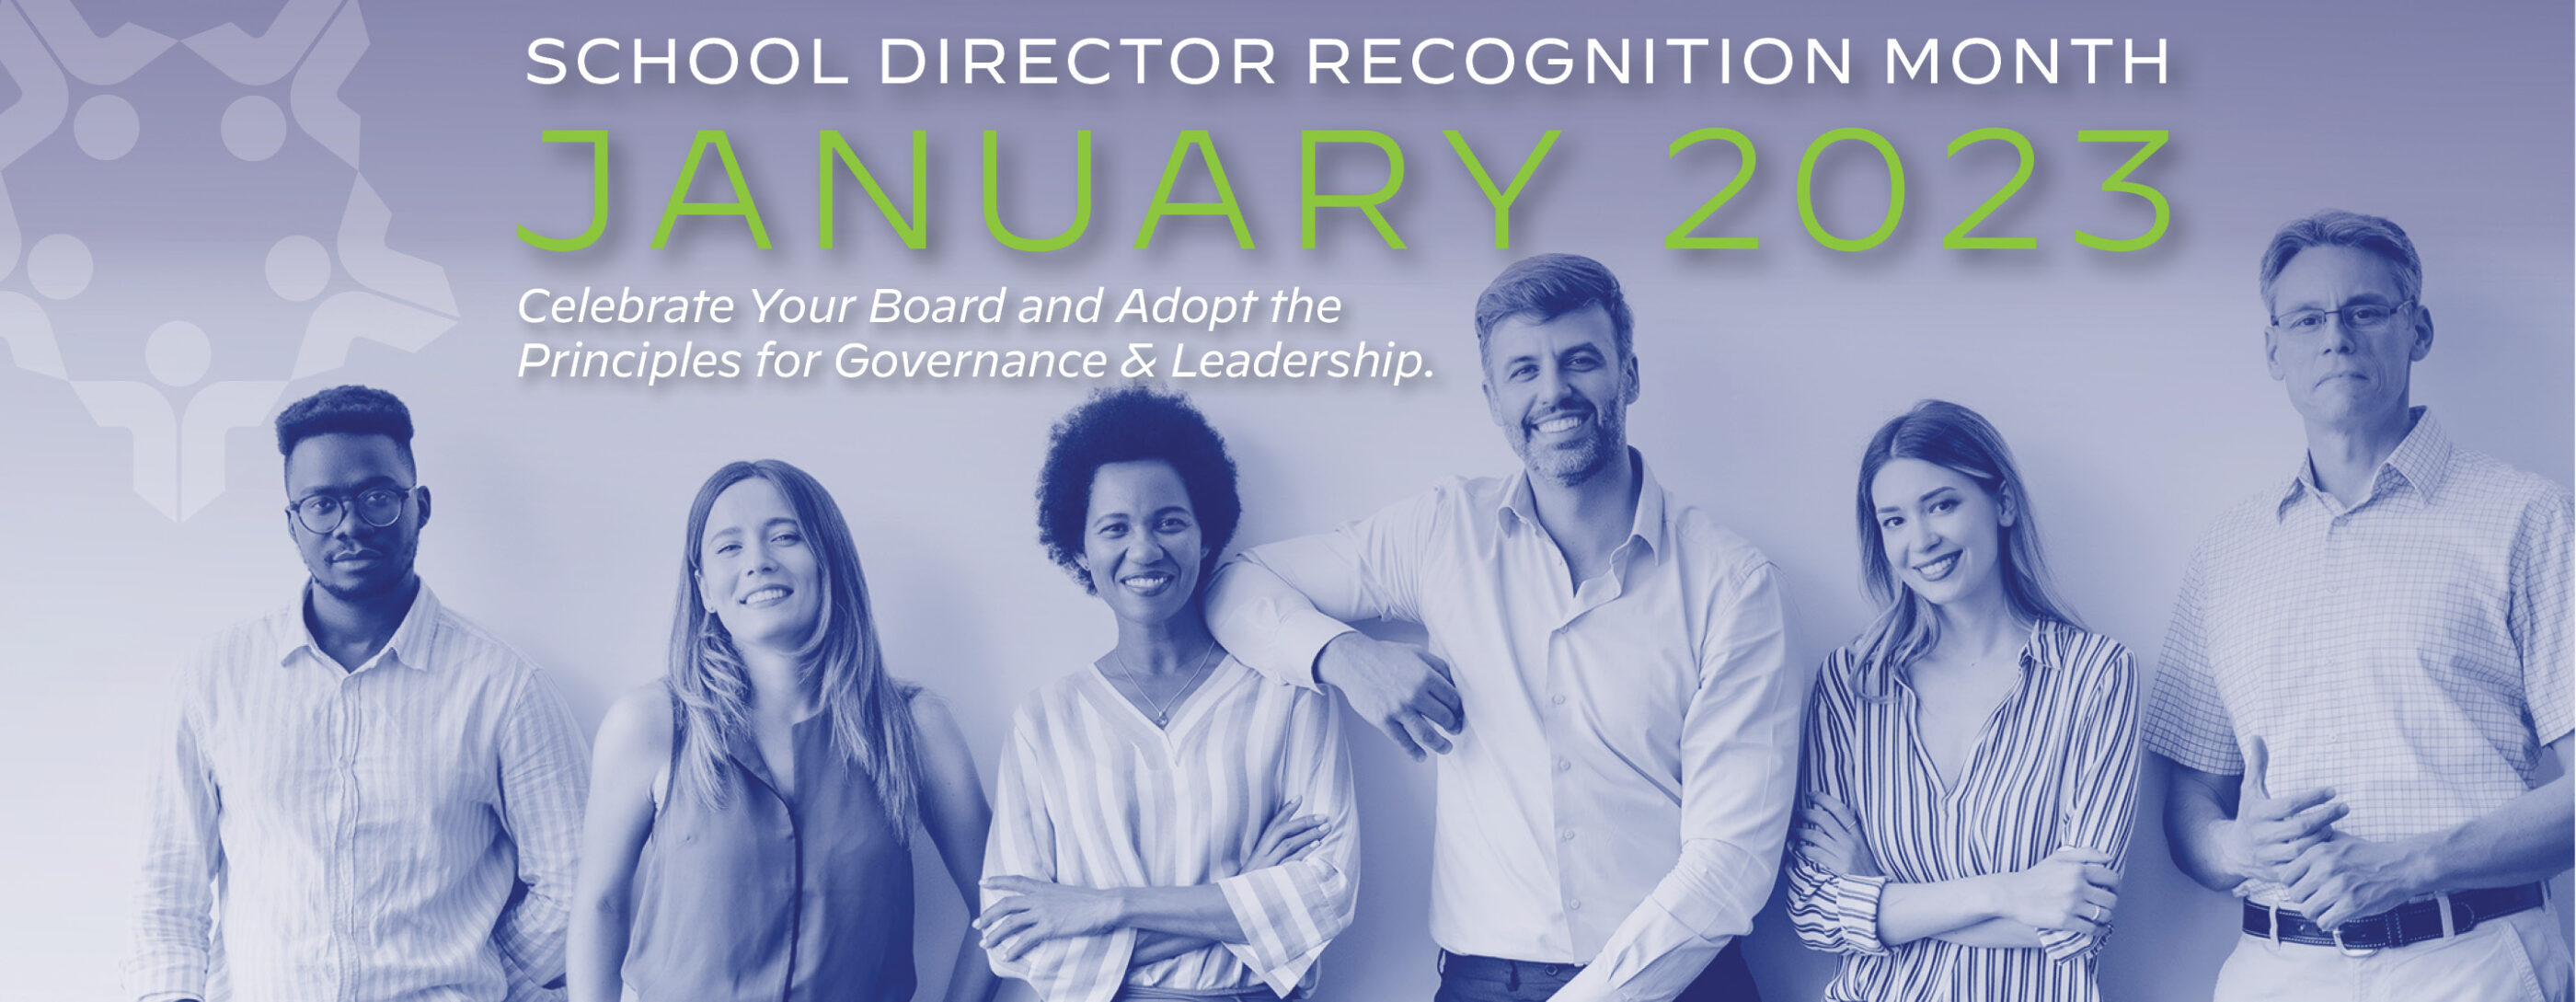 School Director Recognition Month